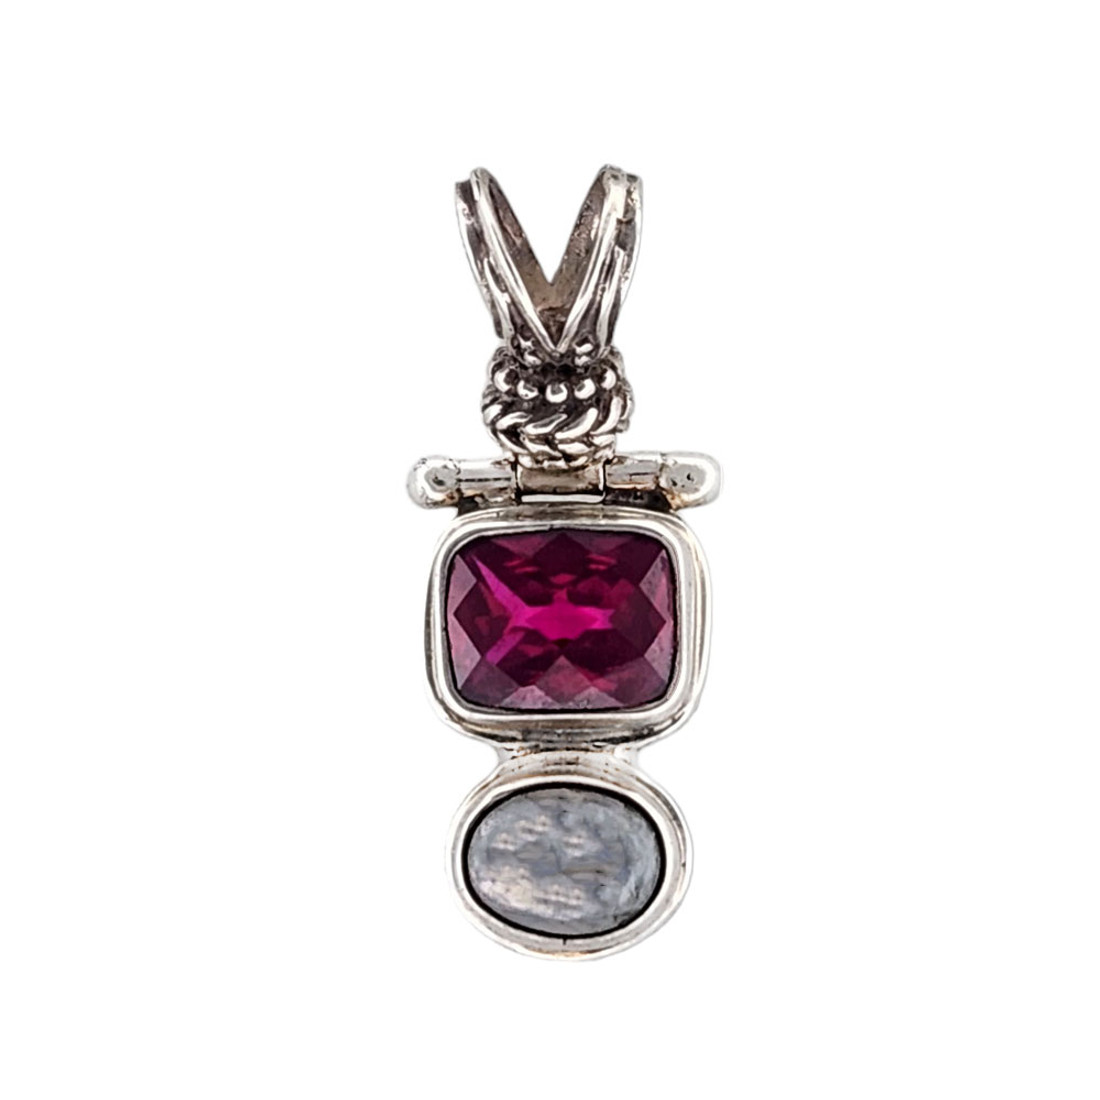 Moonstone and Rose Corrumdum sterling silver pendant from Bali.